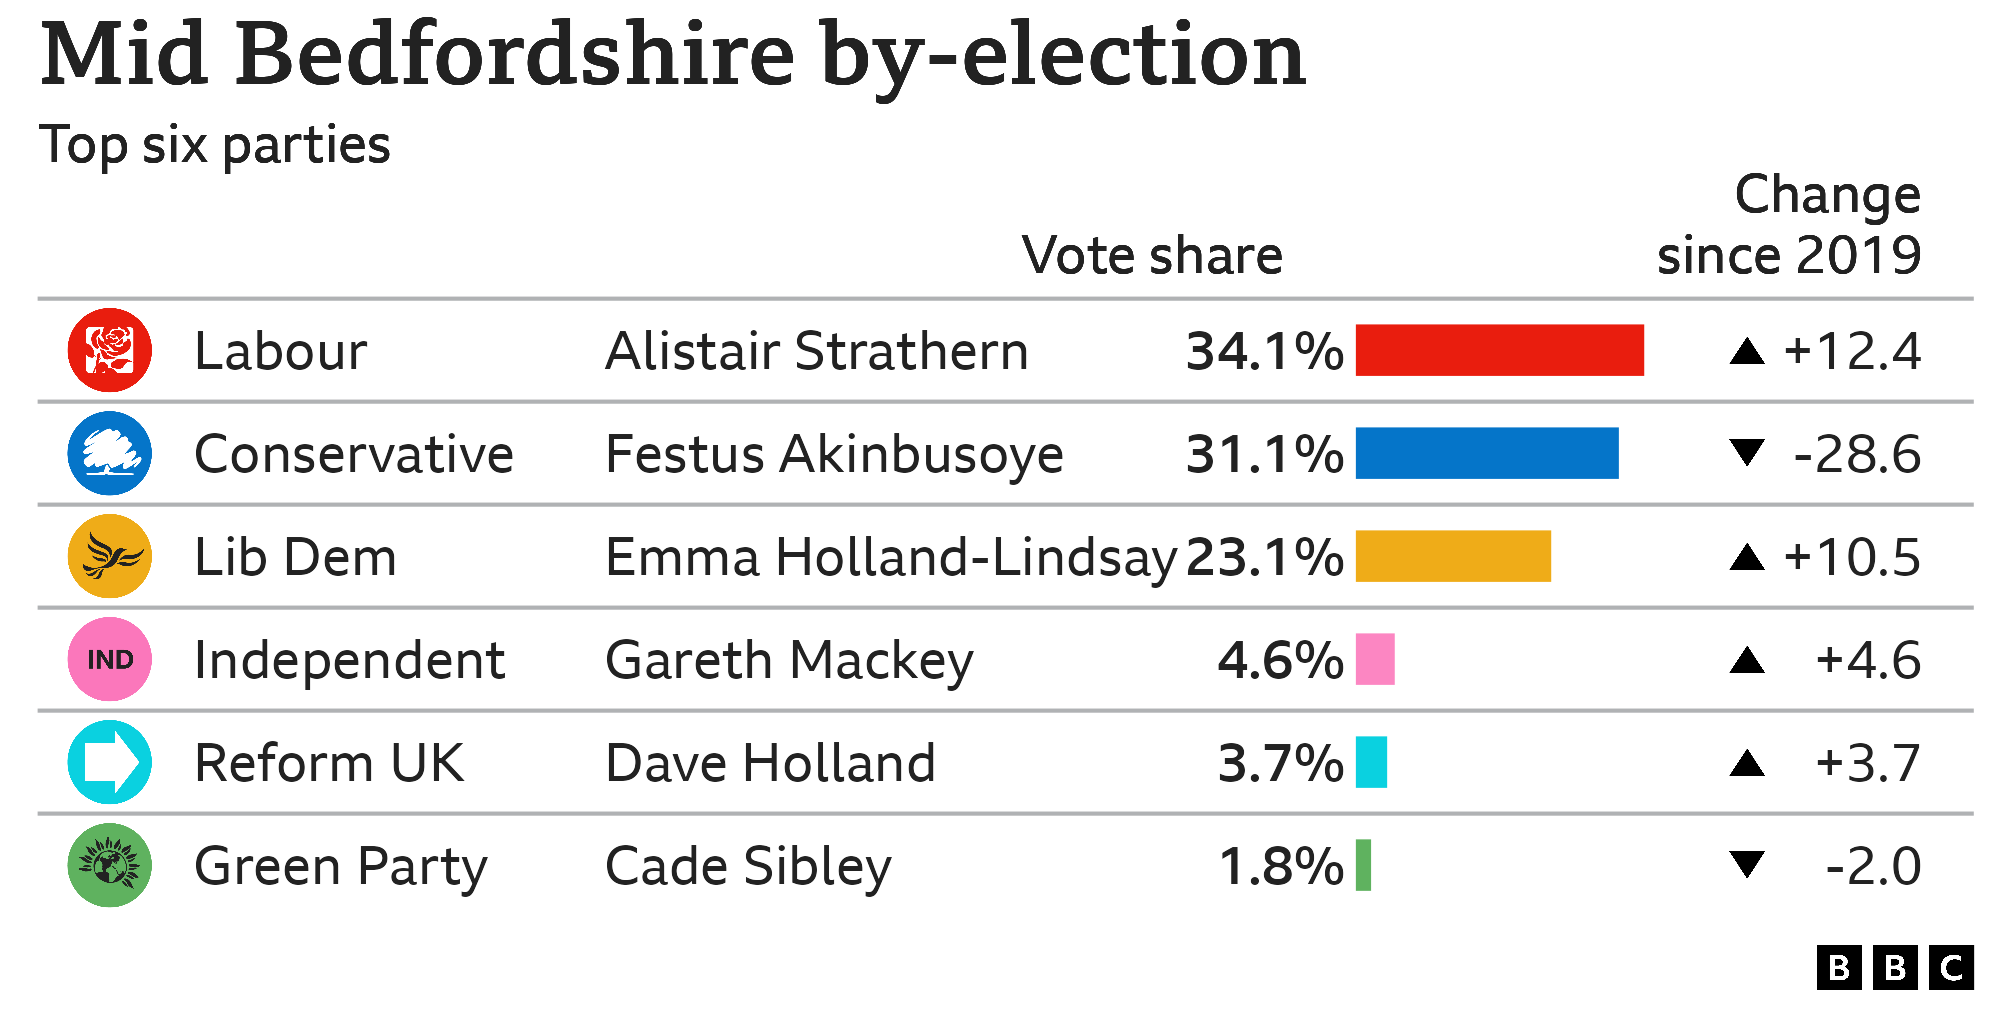 A graphic showing the Mid Bedfordshire by-election results